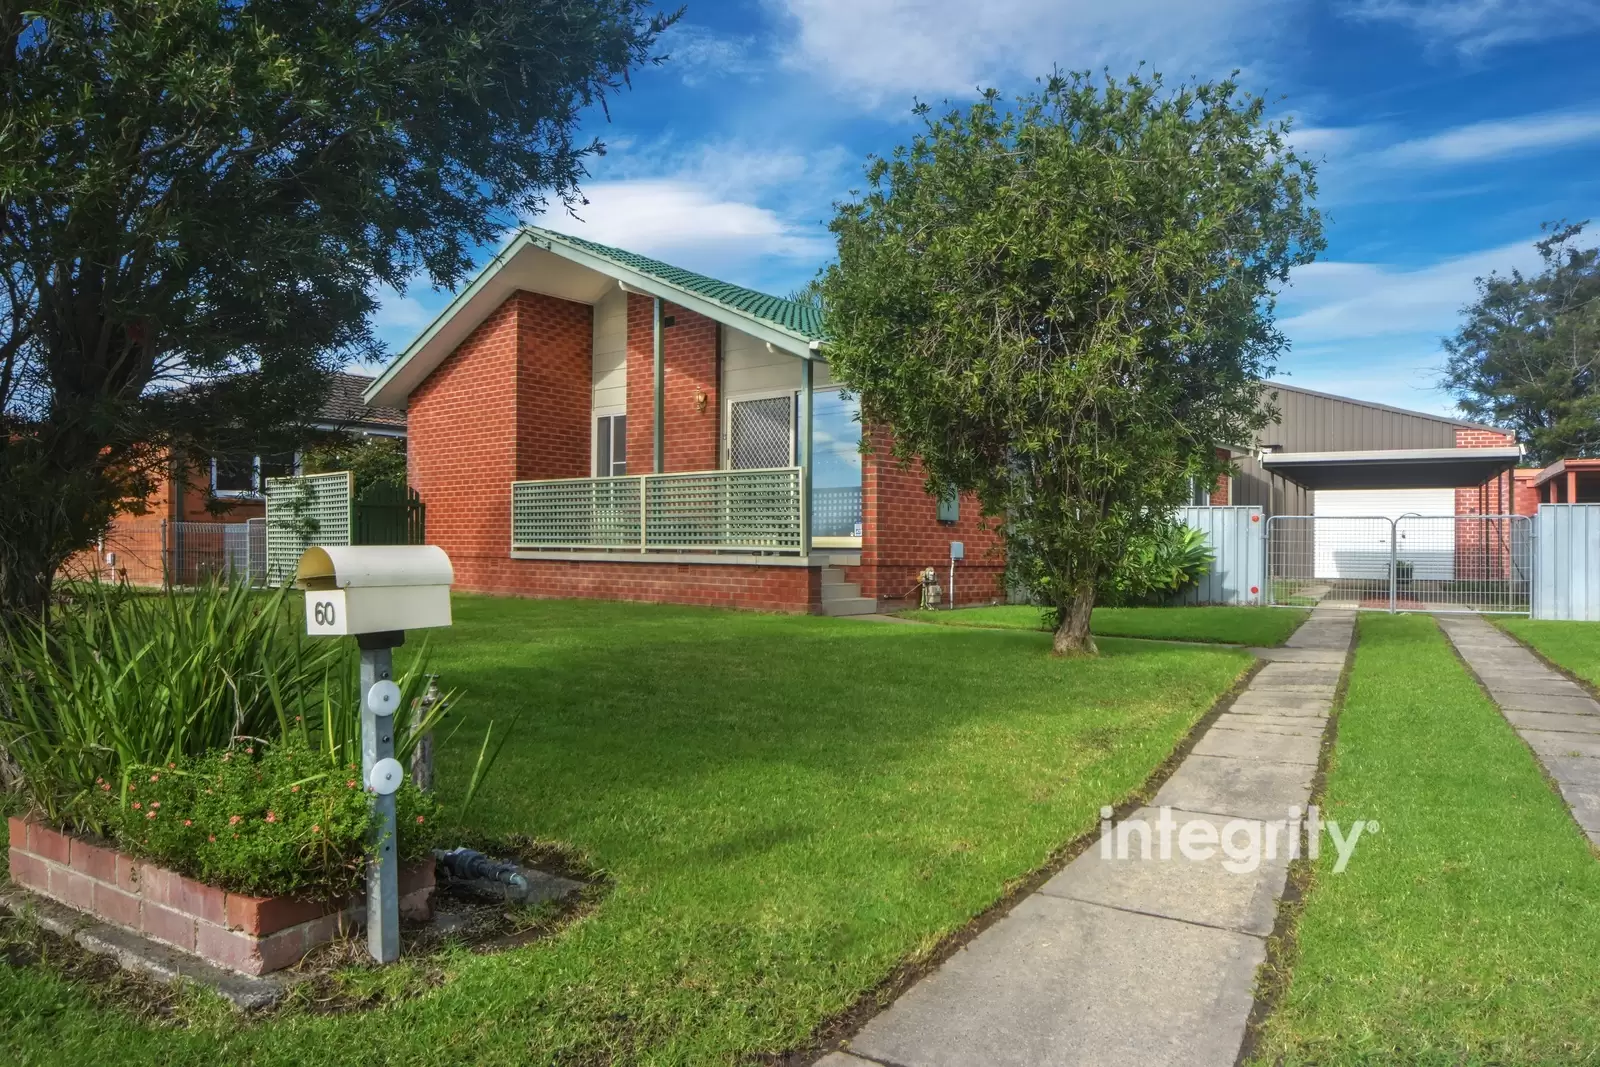 60 McKay Street, Nowra Sold by Integrity Real Estate